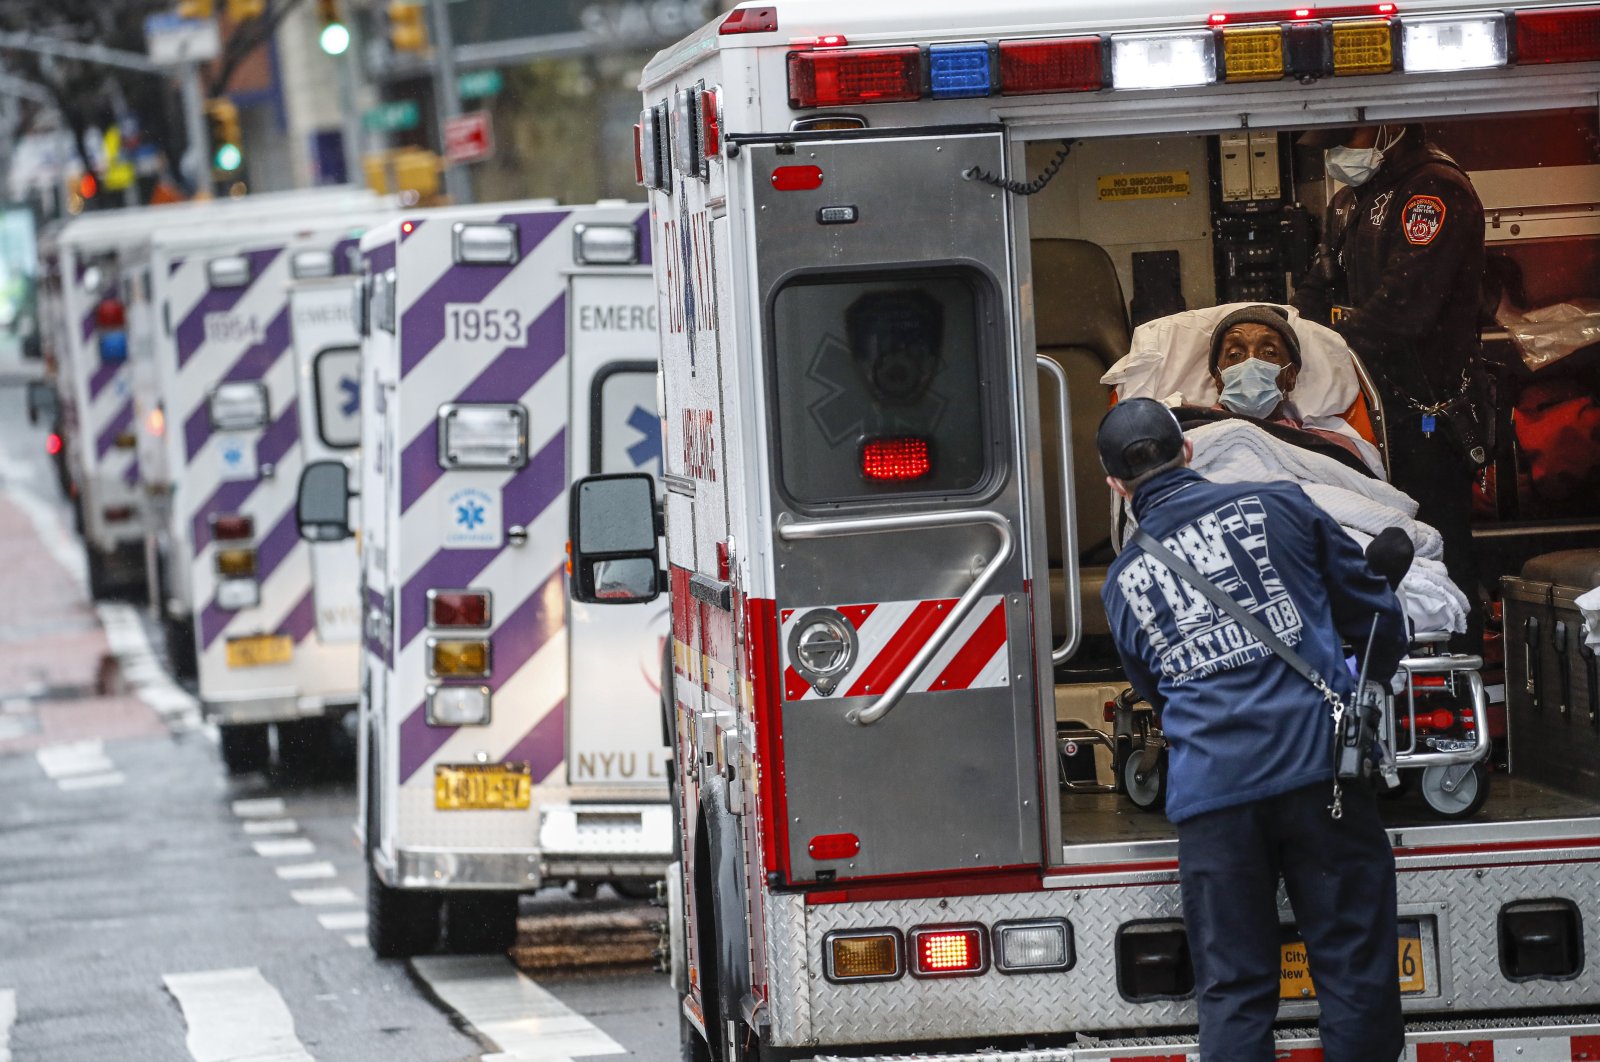 A patient arrives in an ambulance cared for by medical workers wearing personal protective equipment due to COVID-19 concerns, NYU Langone Medical Center, Monday, April 13, 2020, in New York (AP Photo)